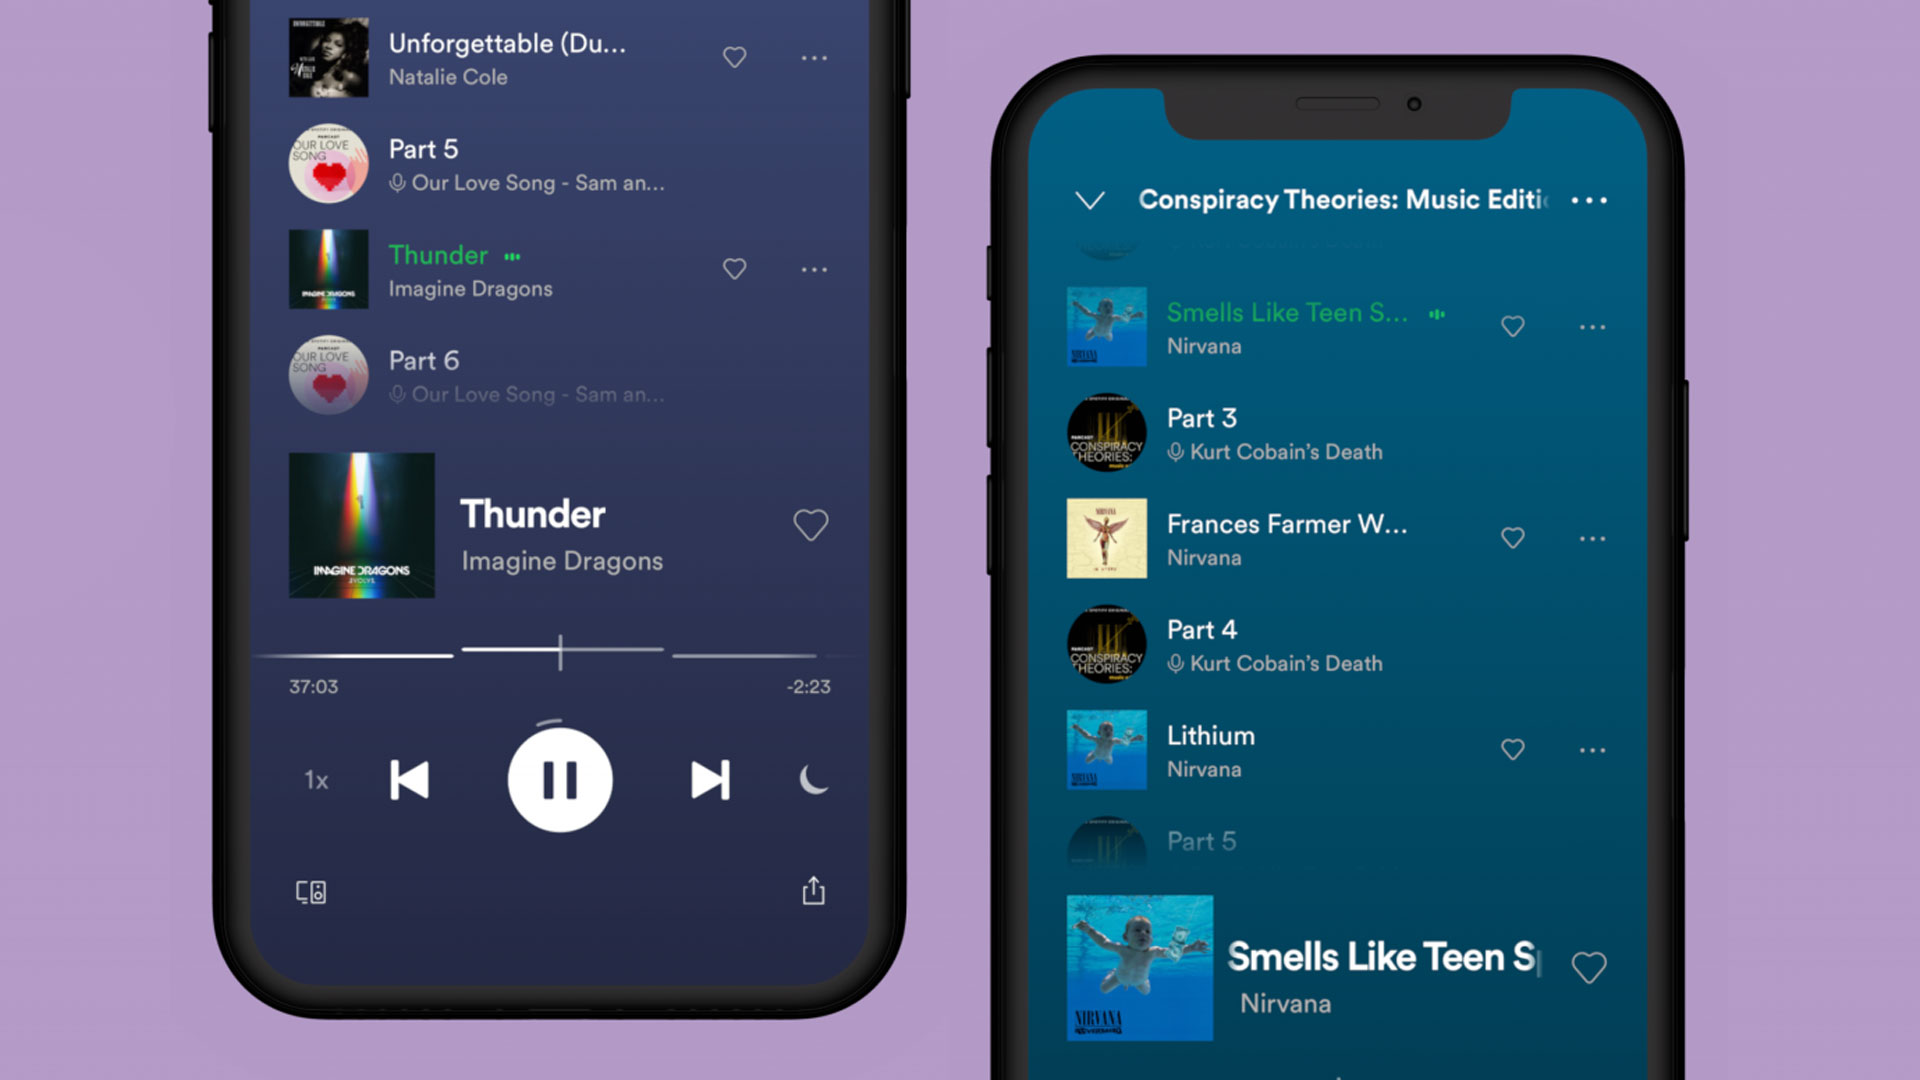 Spotify launches new interactive audio format combining music and talk content